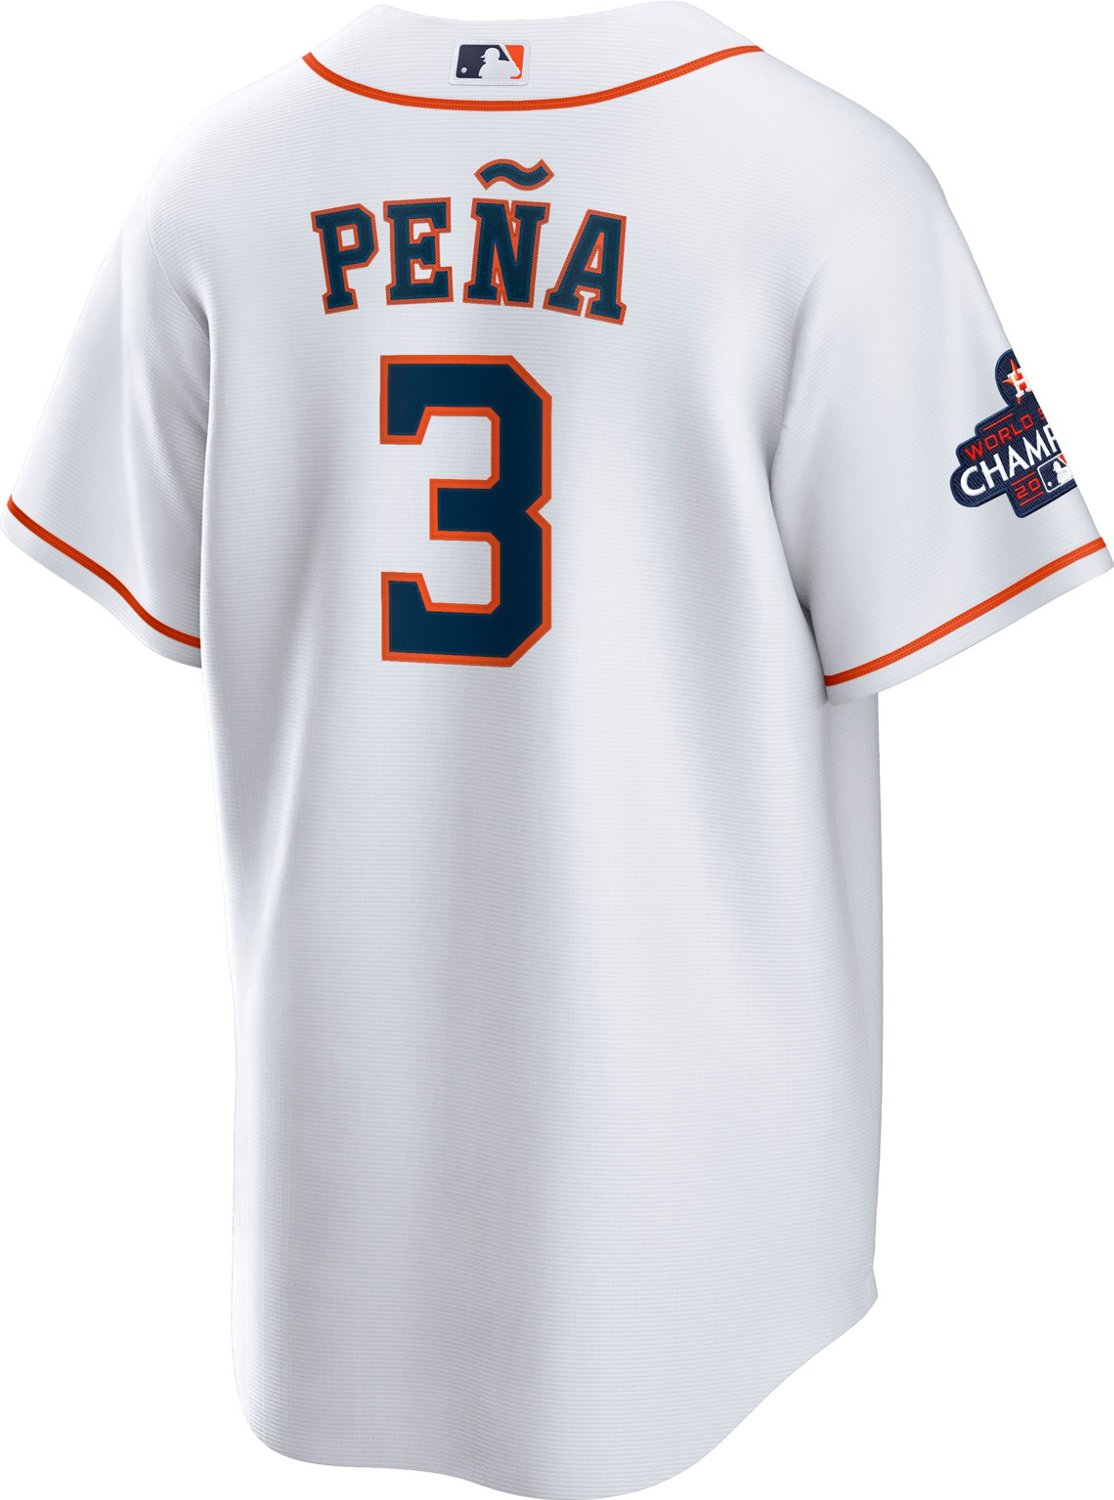 Jeremy Pena 2022 Game-Used Jersey. ALDS Game 2.